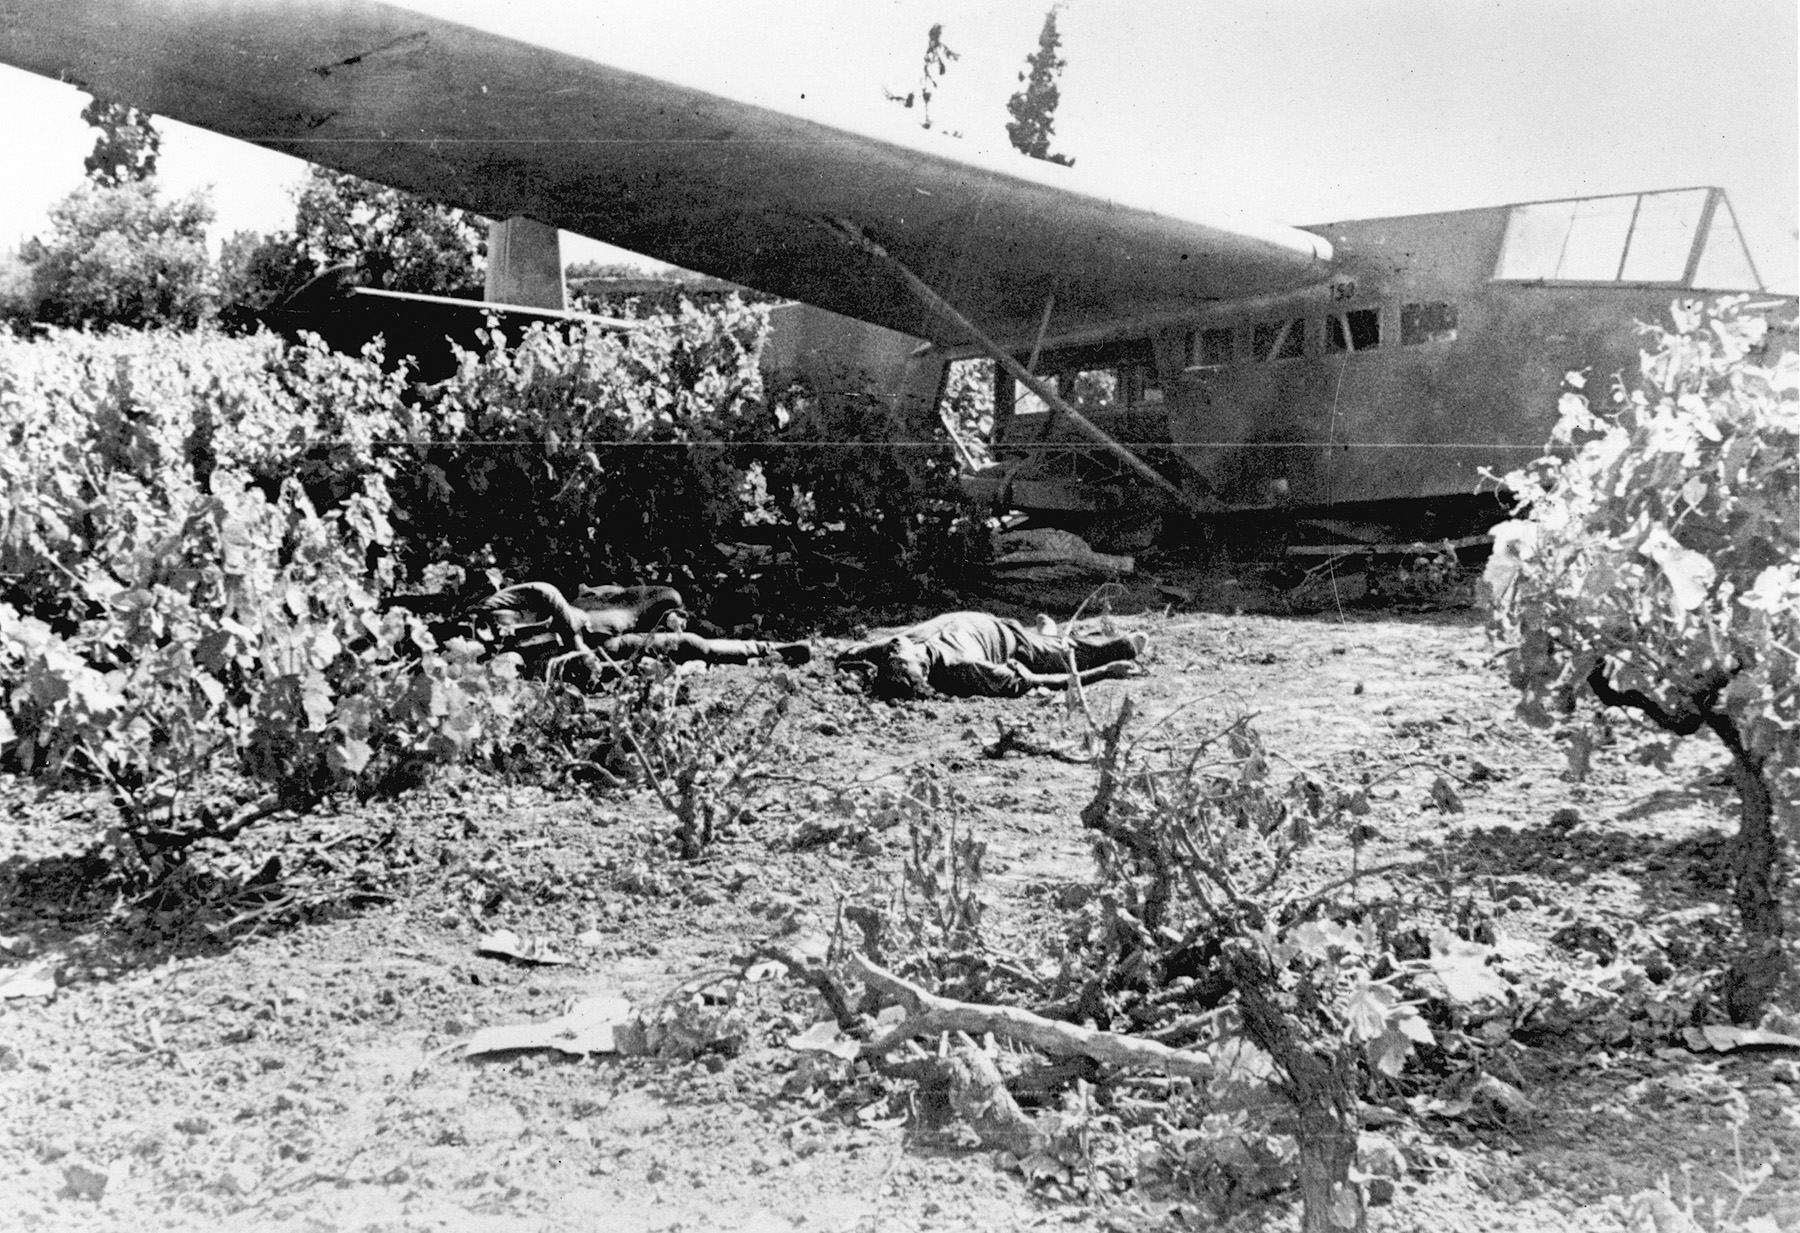 Dead German assault troops lie sprawled alongside the wreckage of their glider in a wooded area on Crete. Casualties among the elite German soldiers who participated in the battle were 
horrendous and prompted Hitler to forbid their use in future airborne operations.